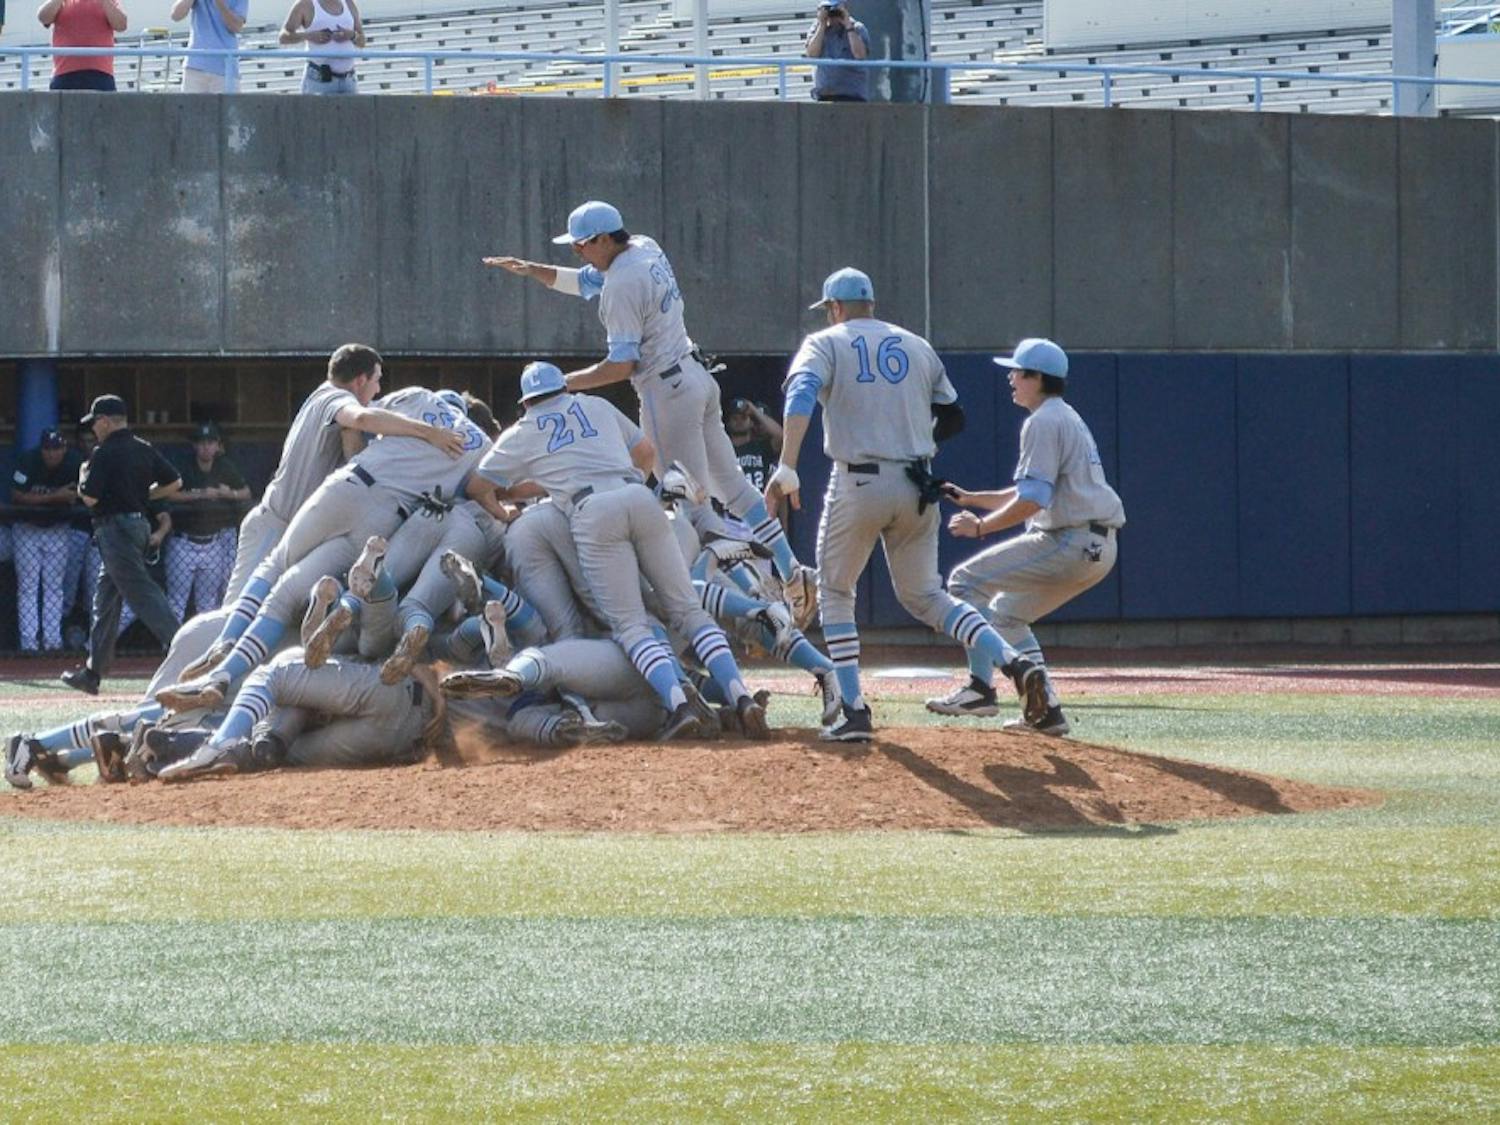 Columbia University claimed their third Ivy crown with a 10-7 victory in the third game of the series. 